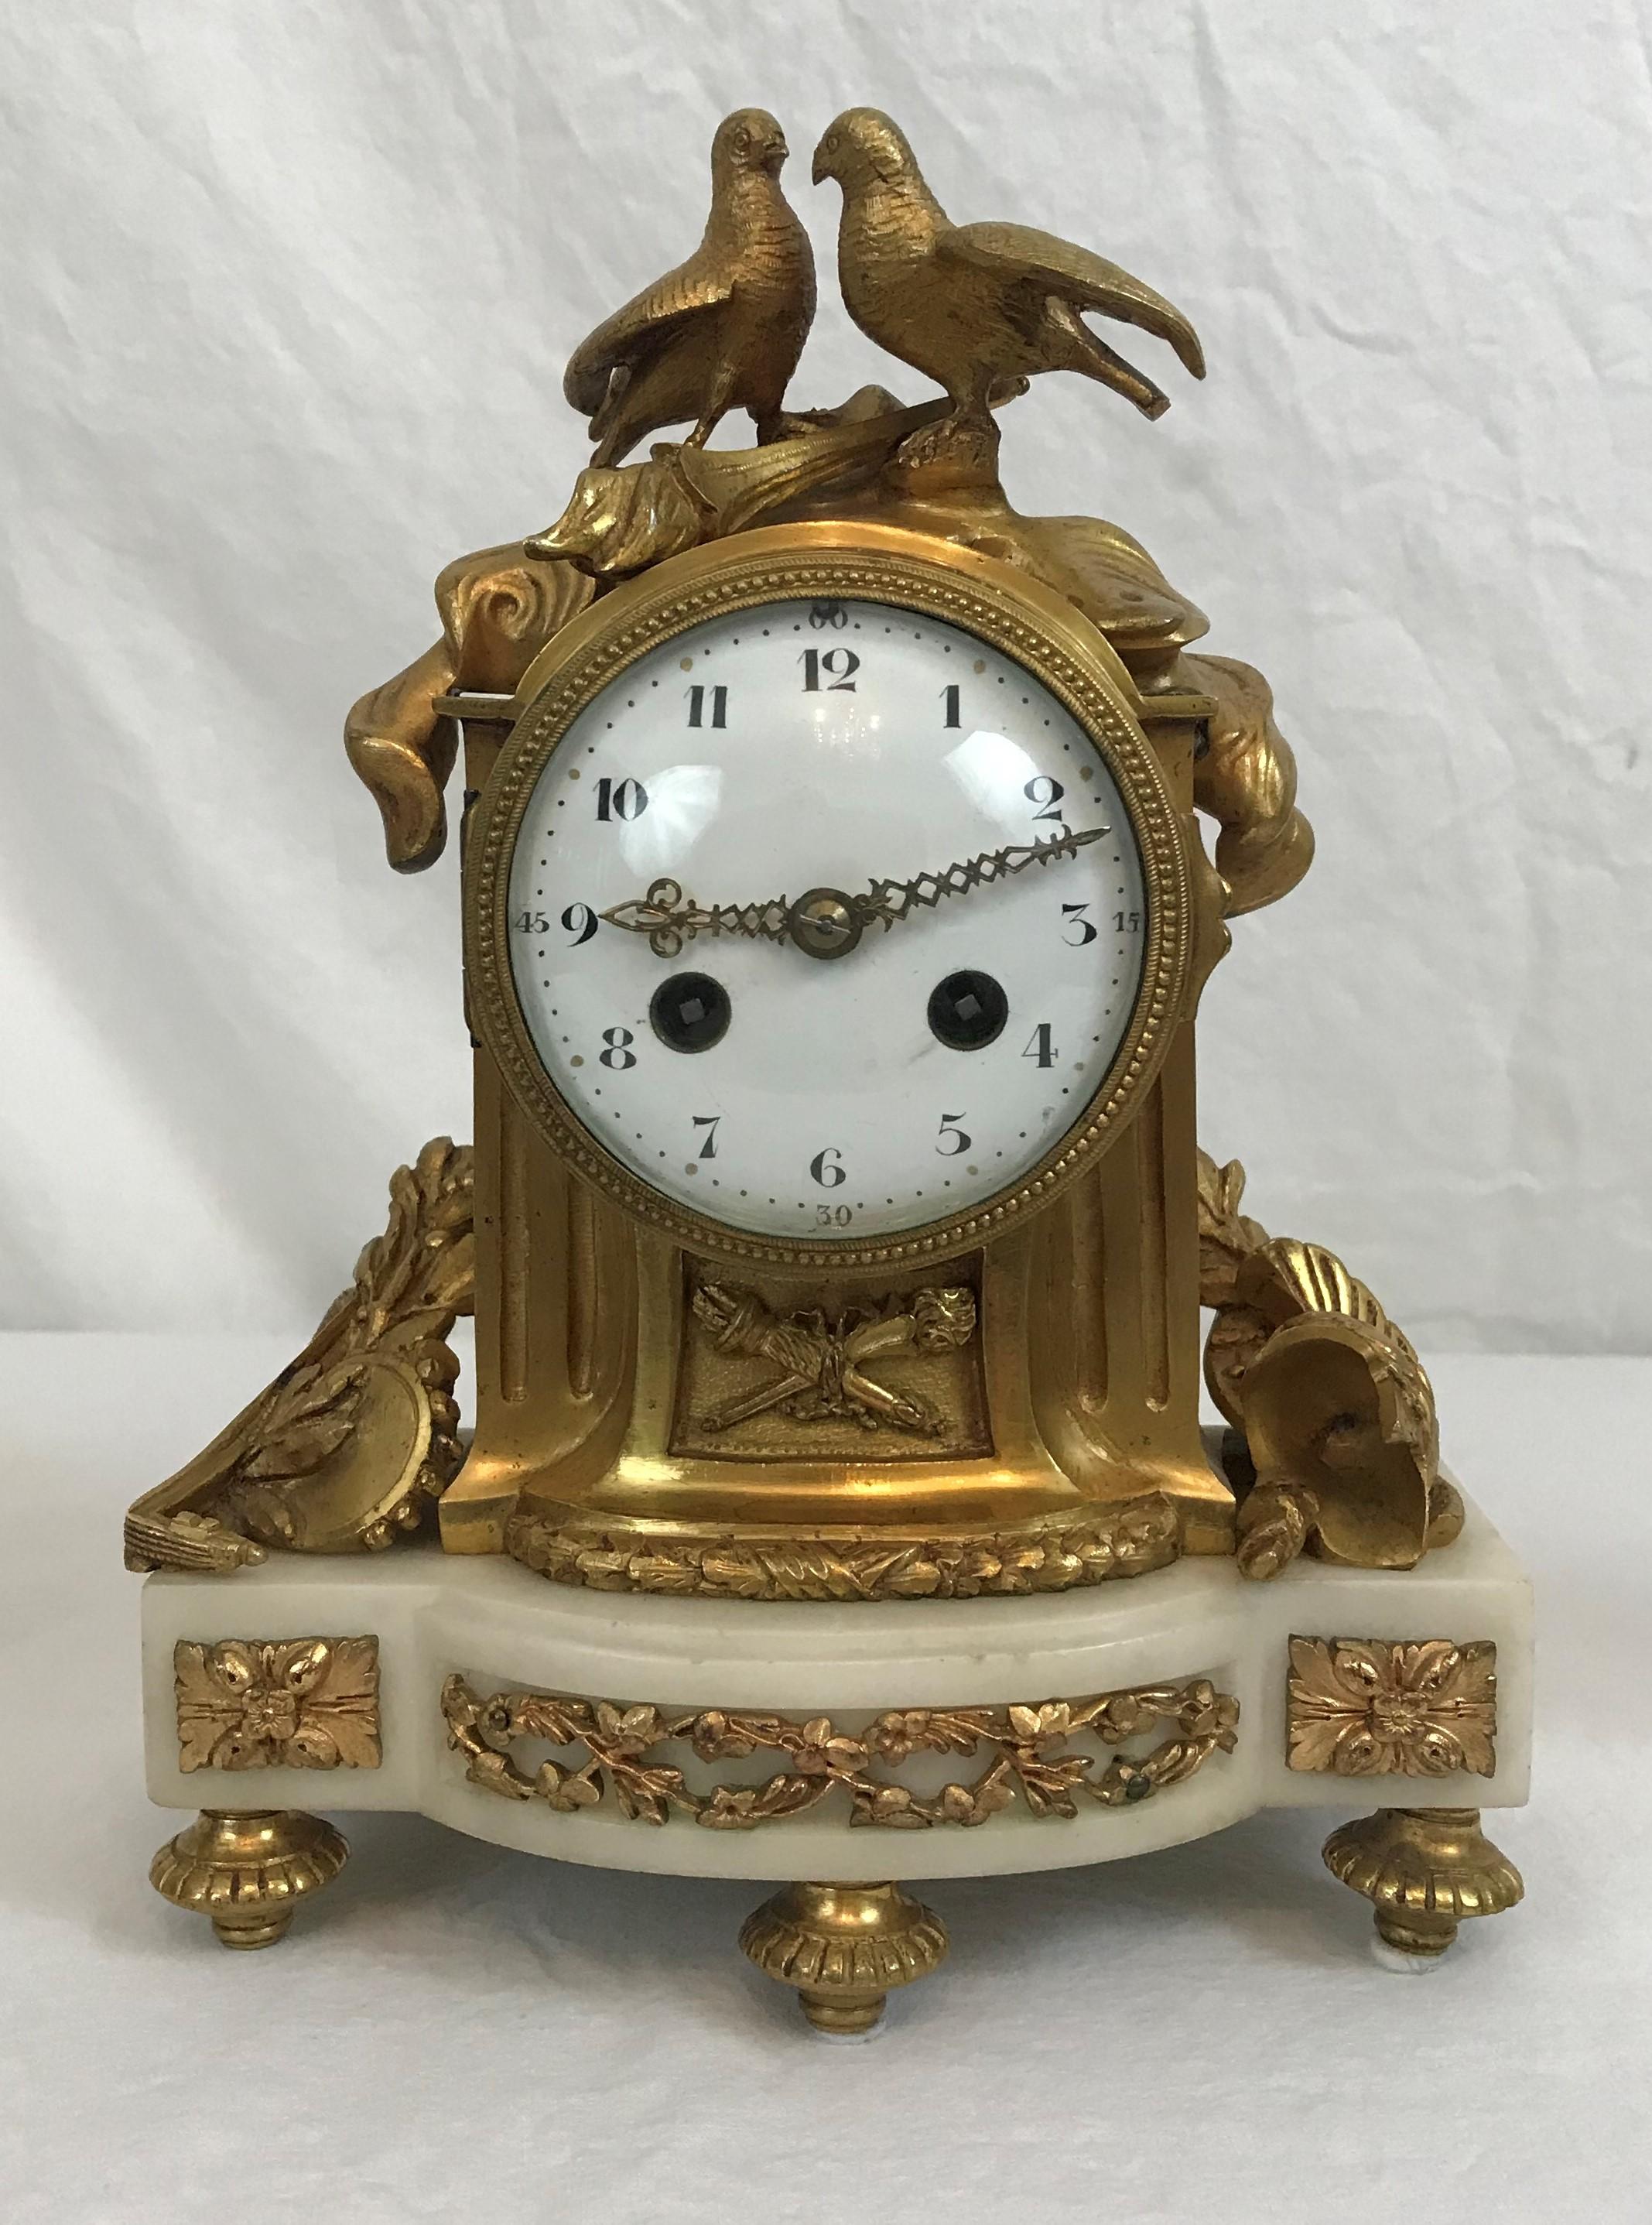 Small size clock and candelabra garniture set. French white marble and ormolu, circa 1890-1900.

Clock is in running condition. Photographed inside without pendulum, but original pendulum is included. 10-1/2